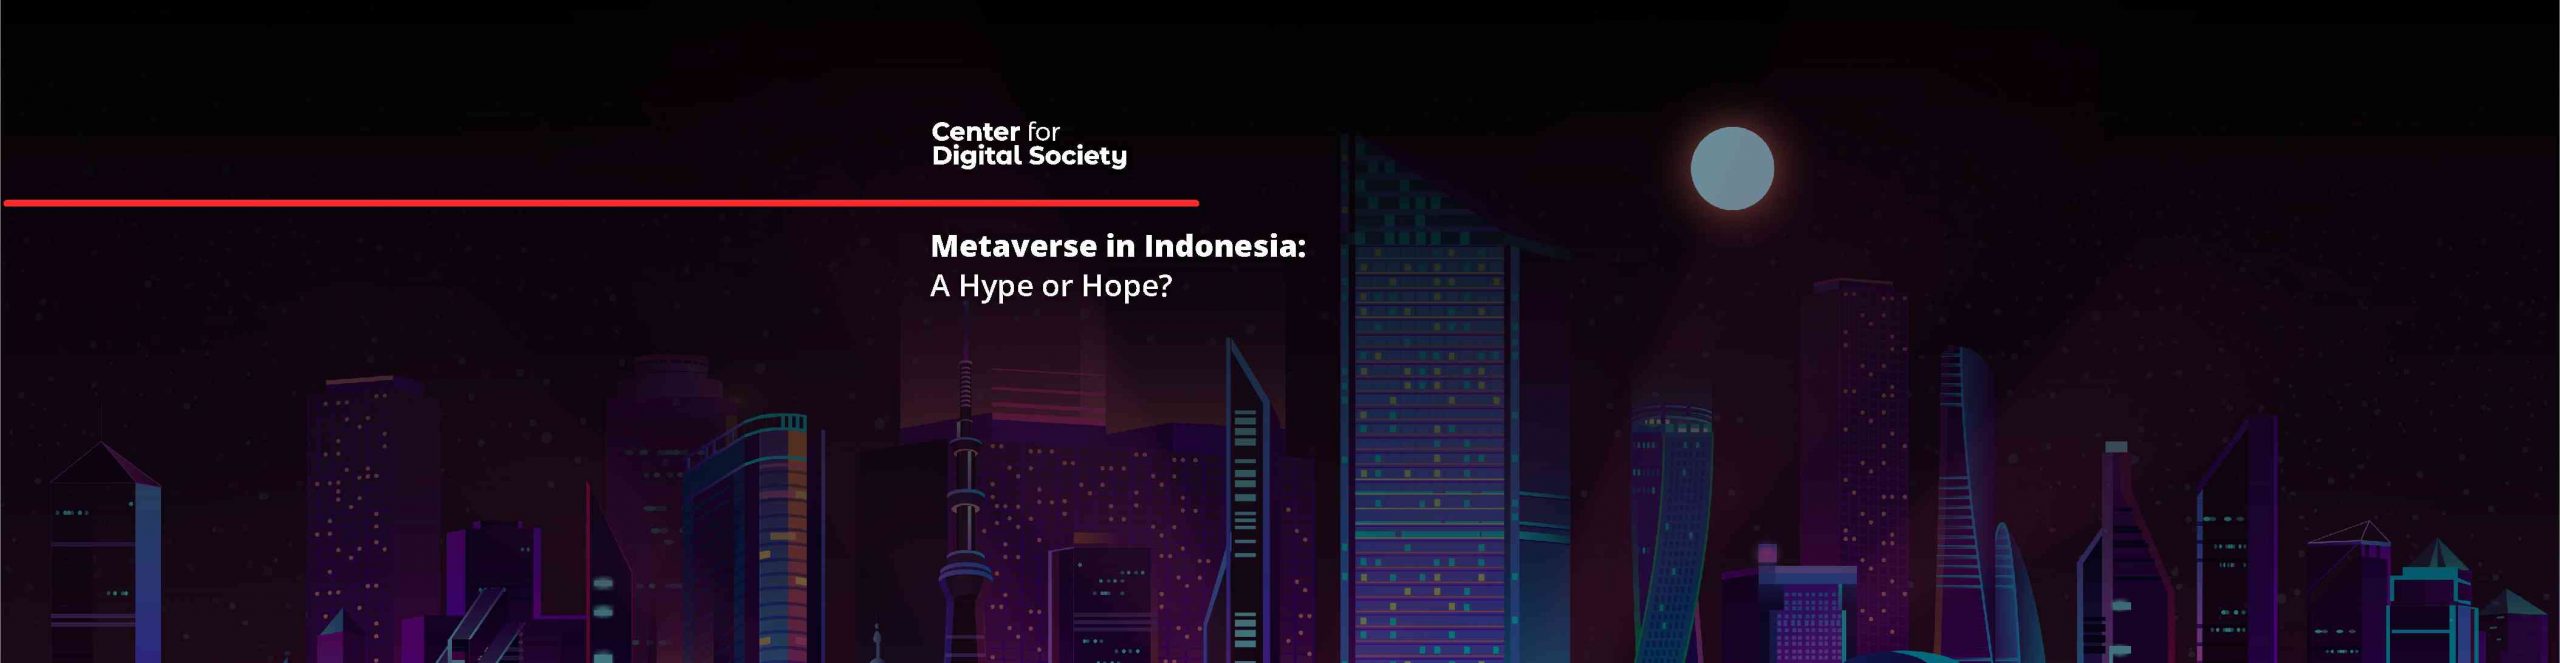 Metaverse in Indonesia: A Hype or Hope?